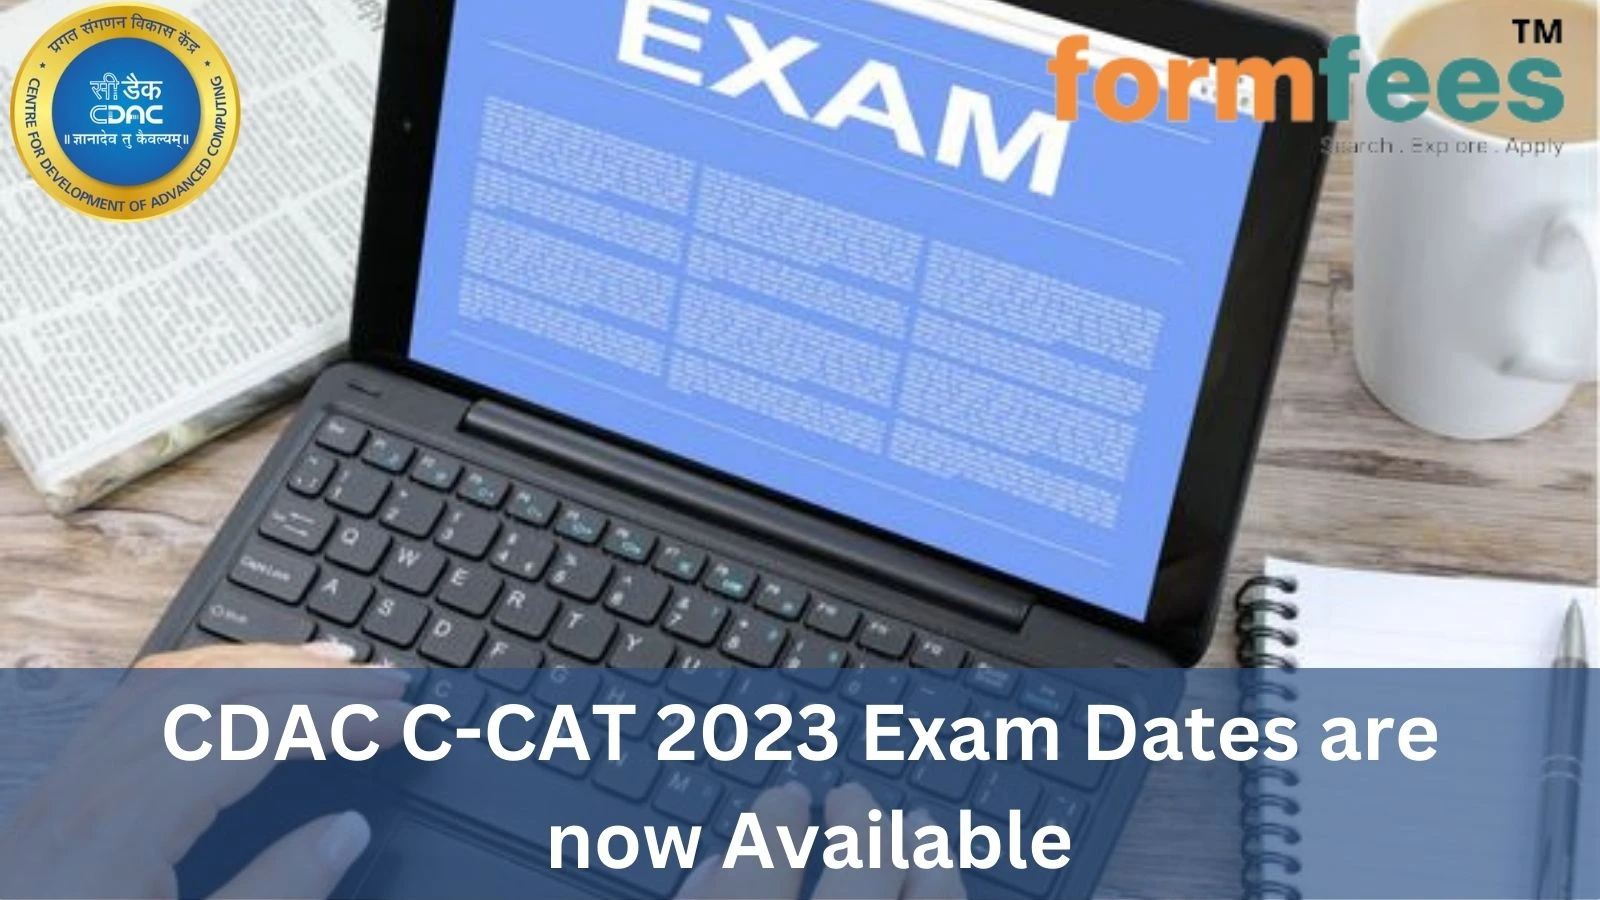 CDAC C-CAT 2023 Exam Dates are now Available